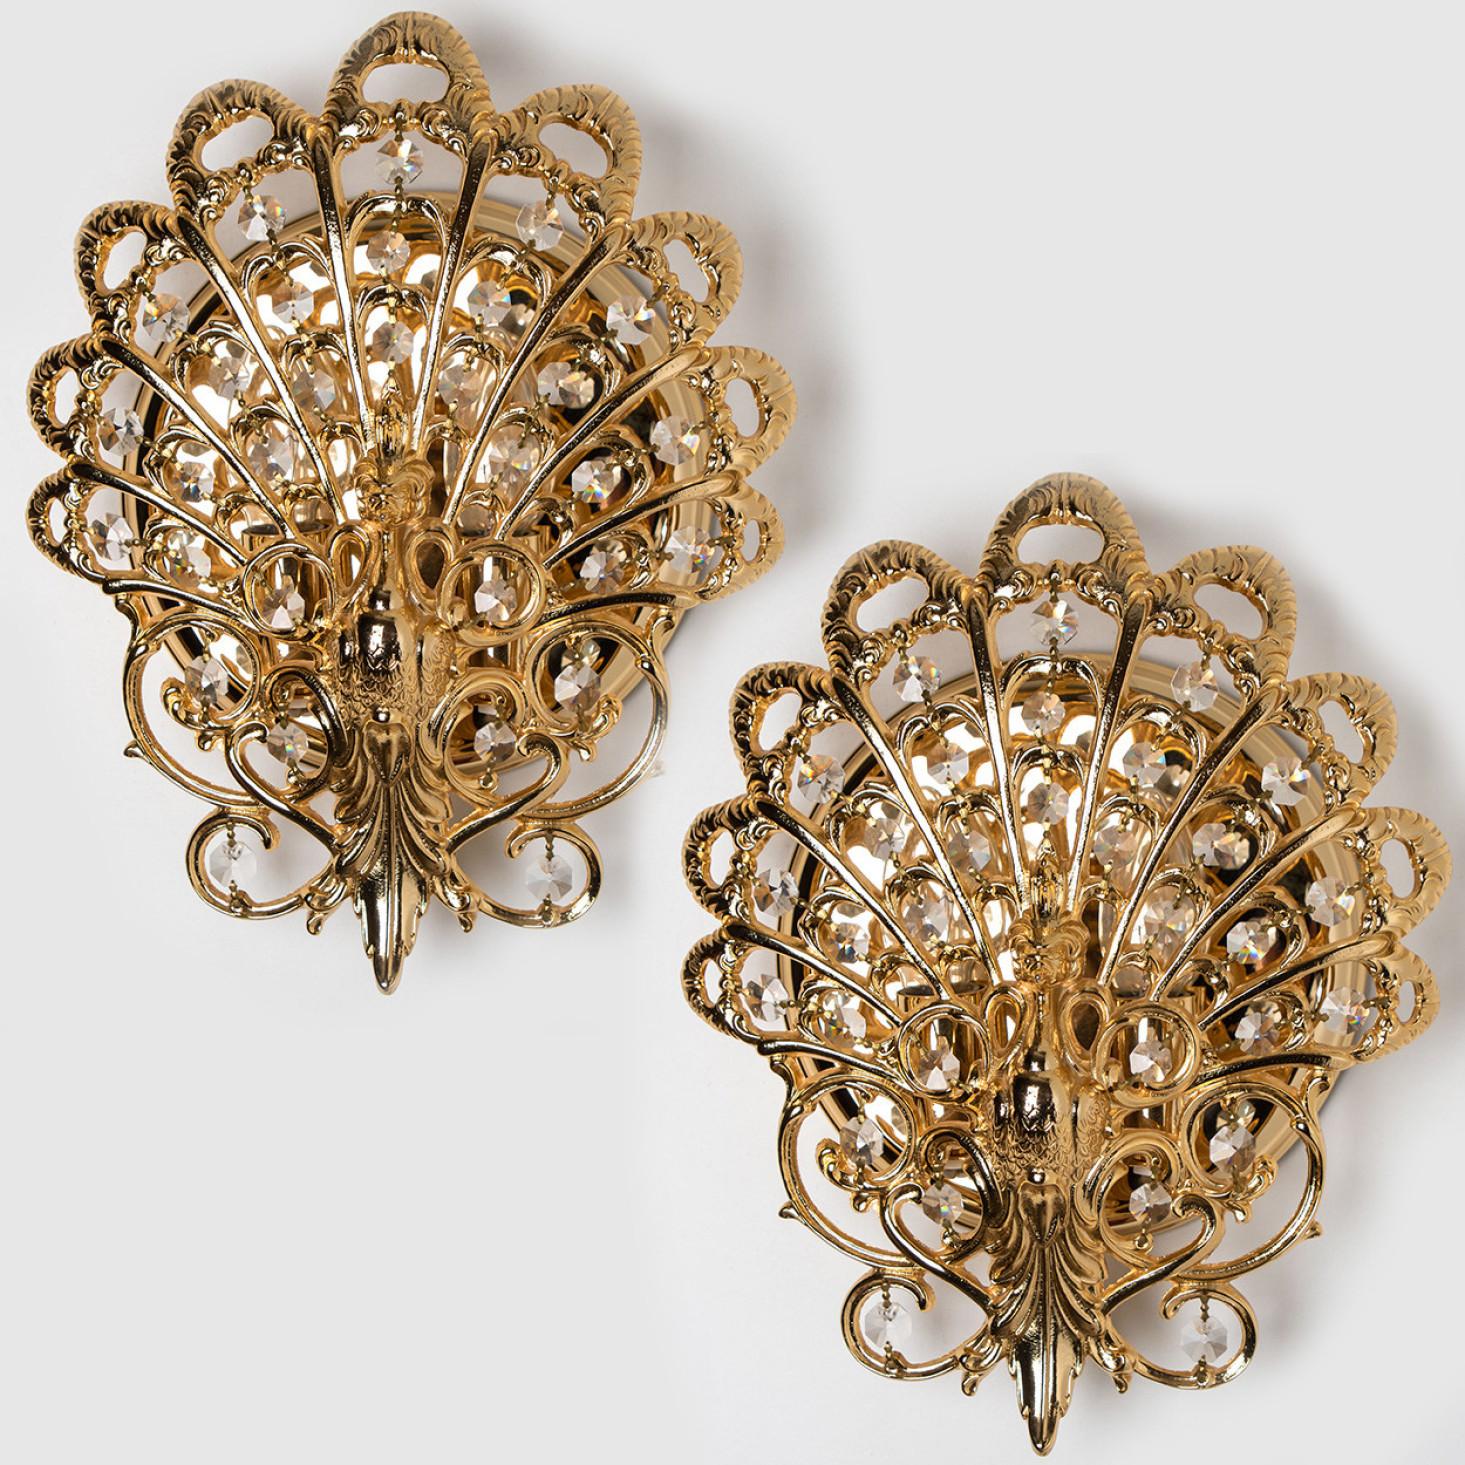 Pair of beautiful brass wall lights with crystal glass beads. Manufactured in the 1960s in Europe, Spain.

The lights are in the  shape of a peacock. With crystal beads between the brass feathers.

They illuminate beautifully.

Measurements: depth